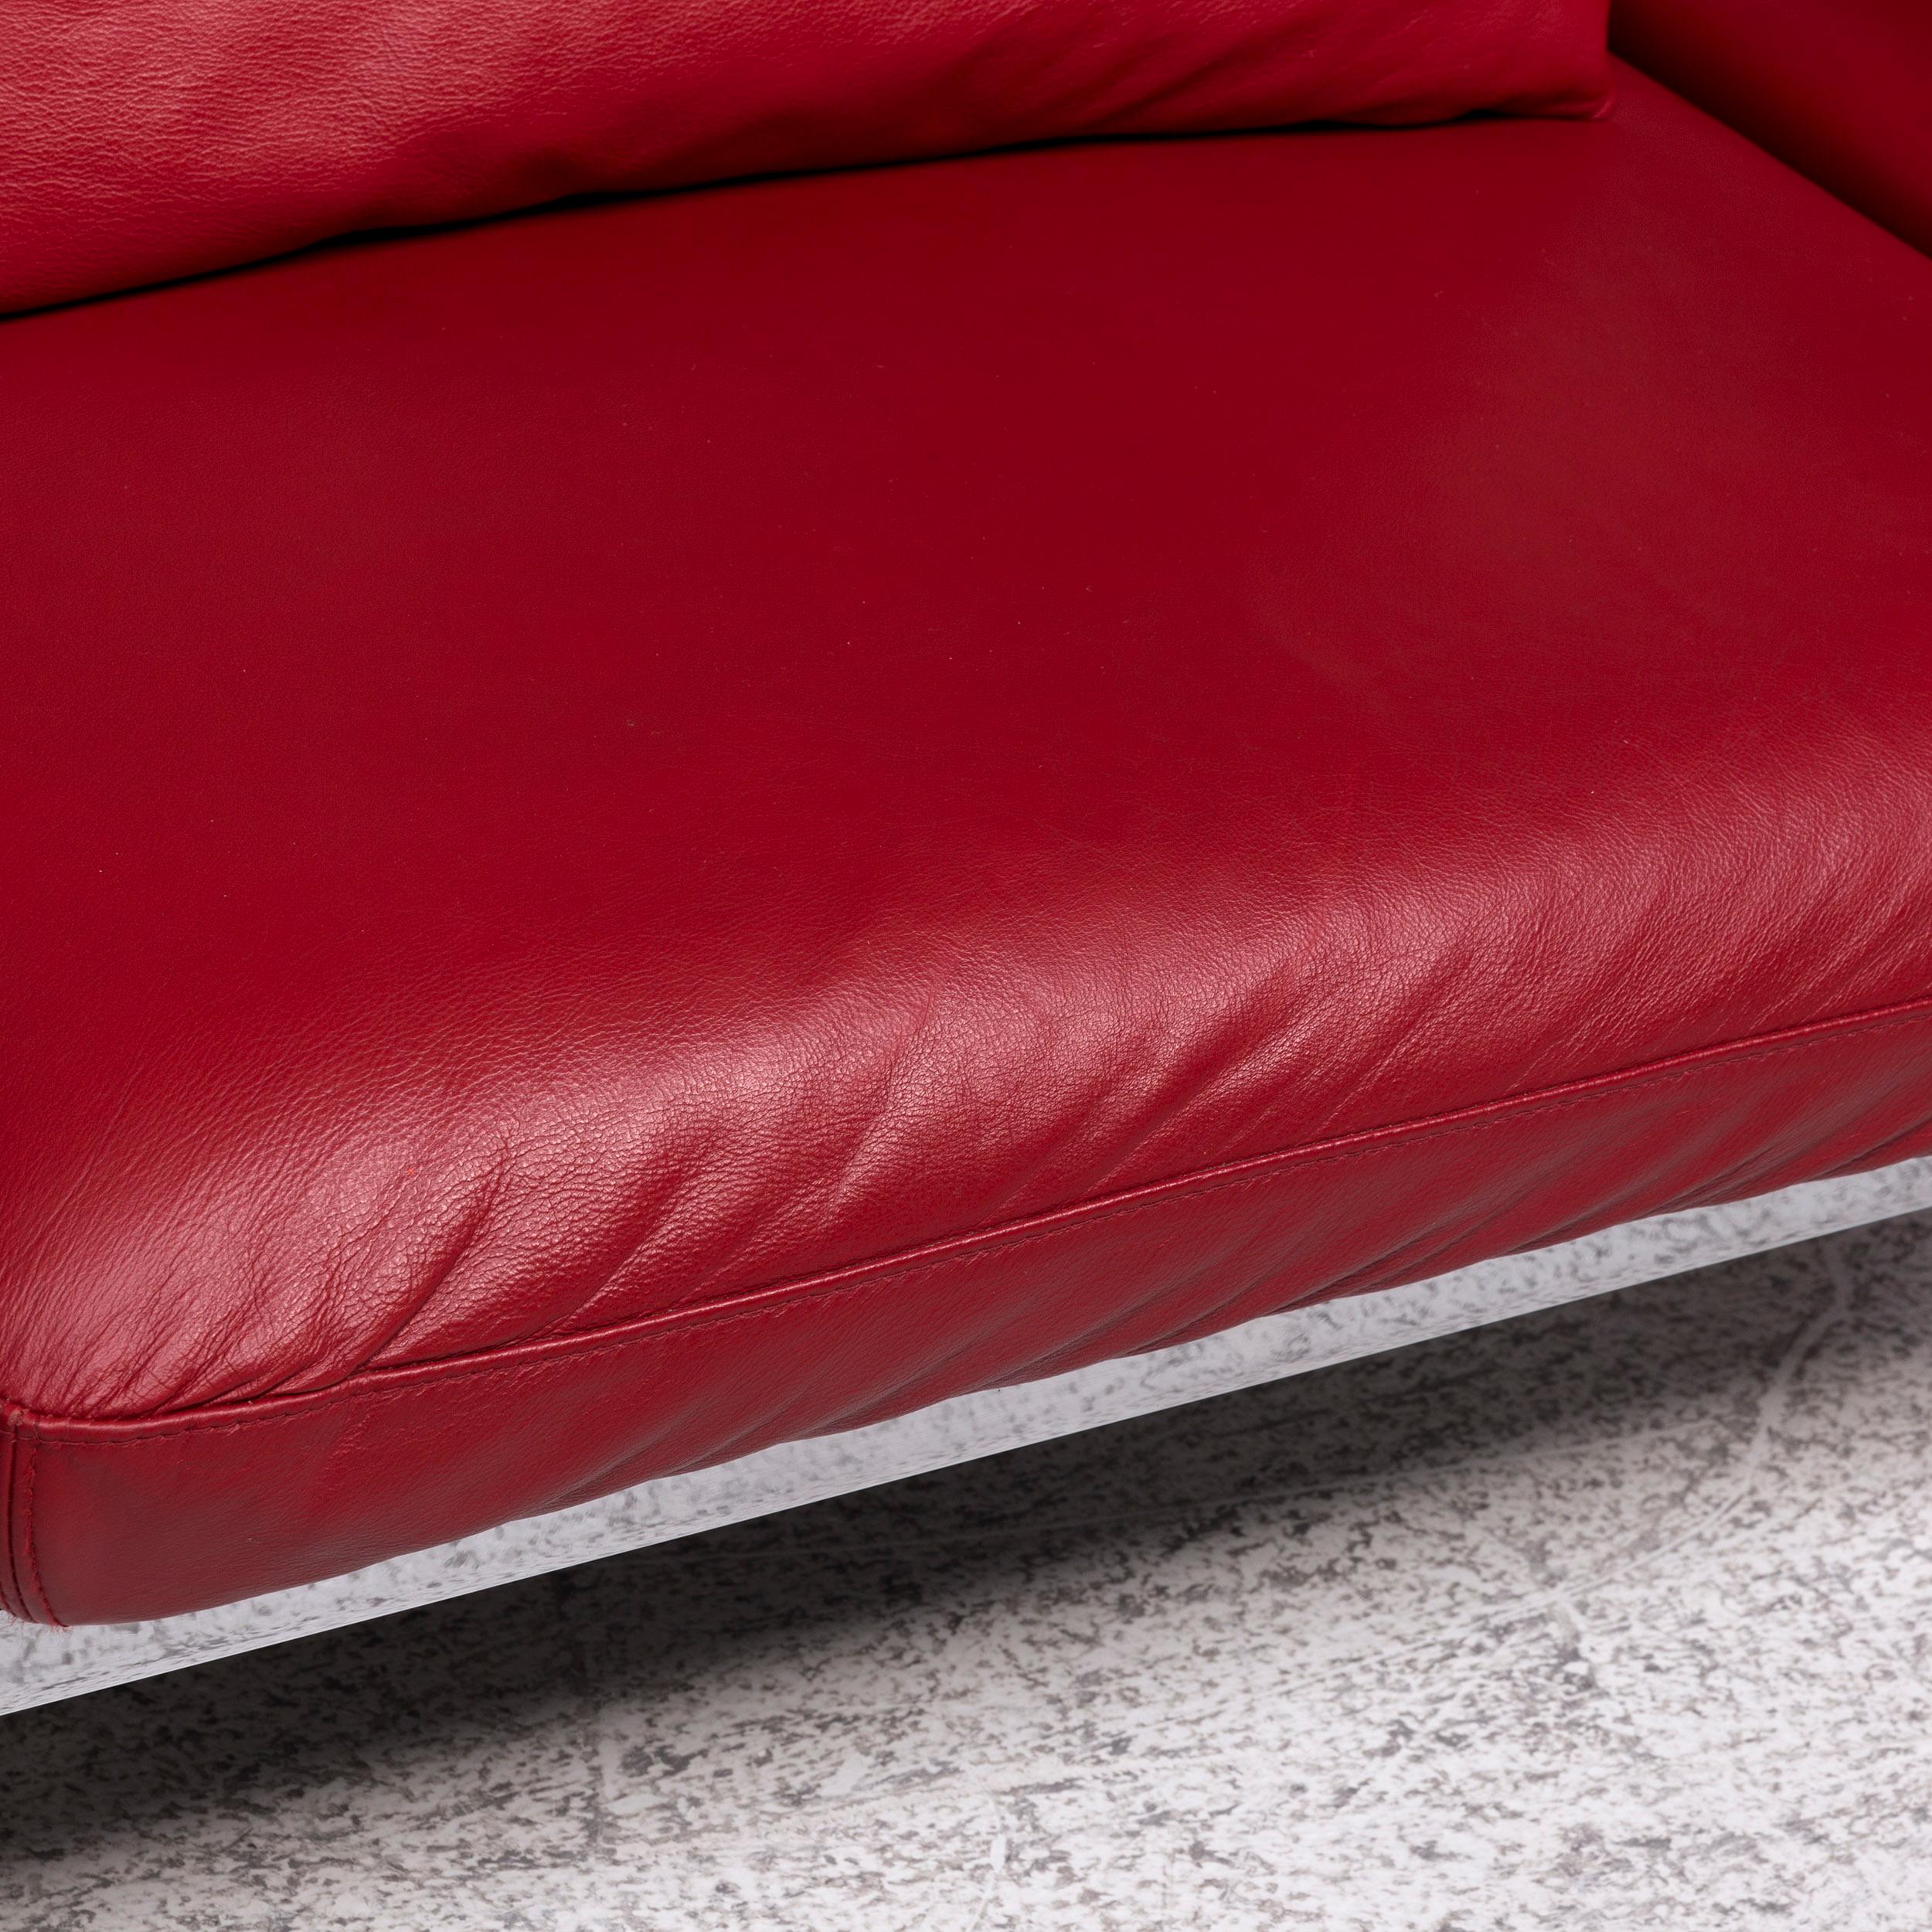 Contemporary Brühl & Sippold Roro Designer Leather Sofa Red Two-Seat Relax Function Couch